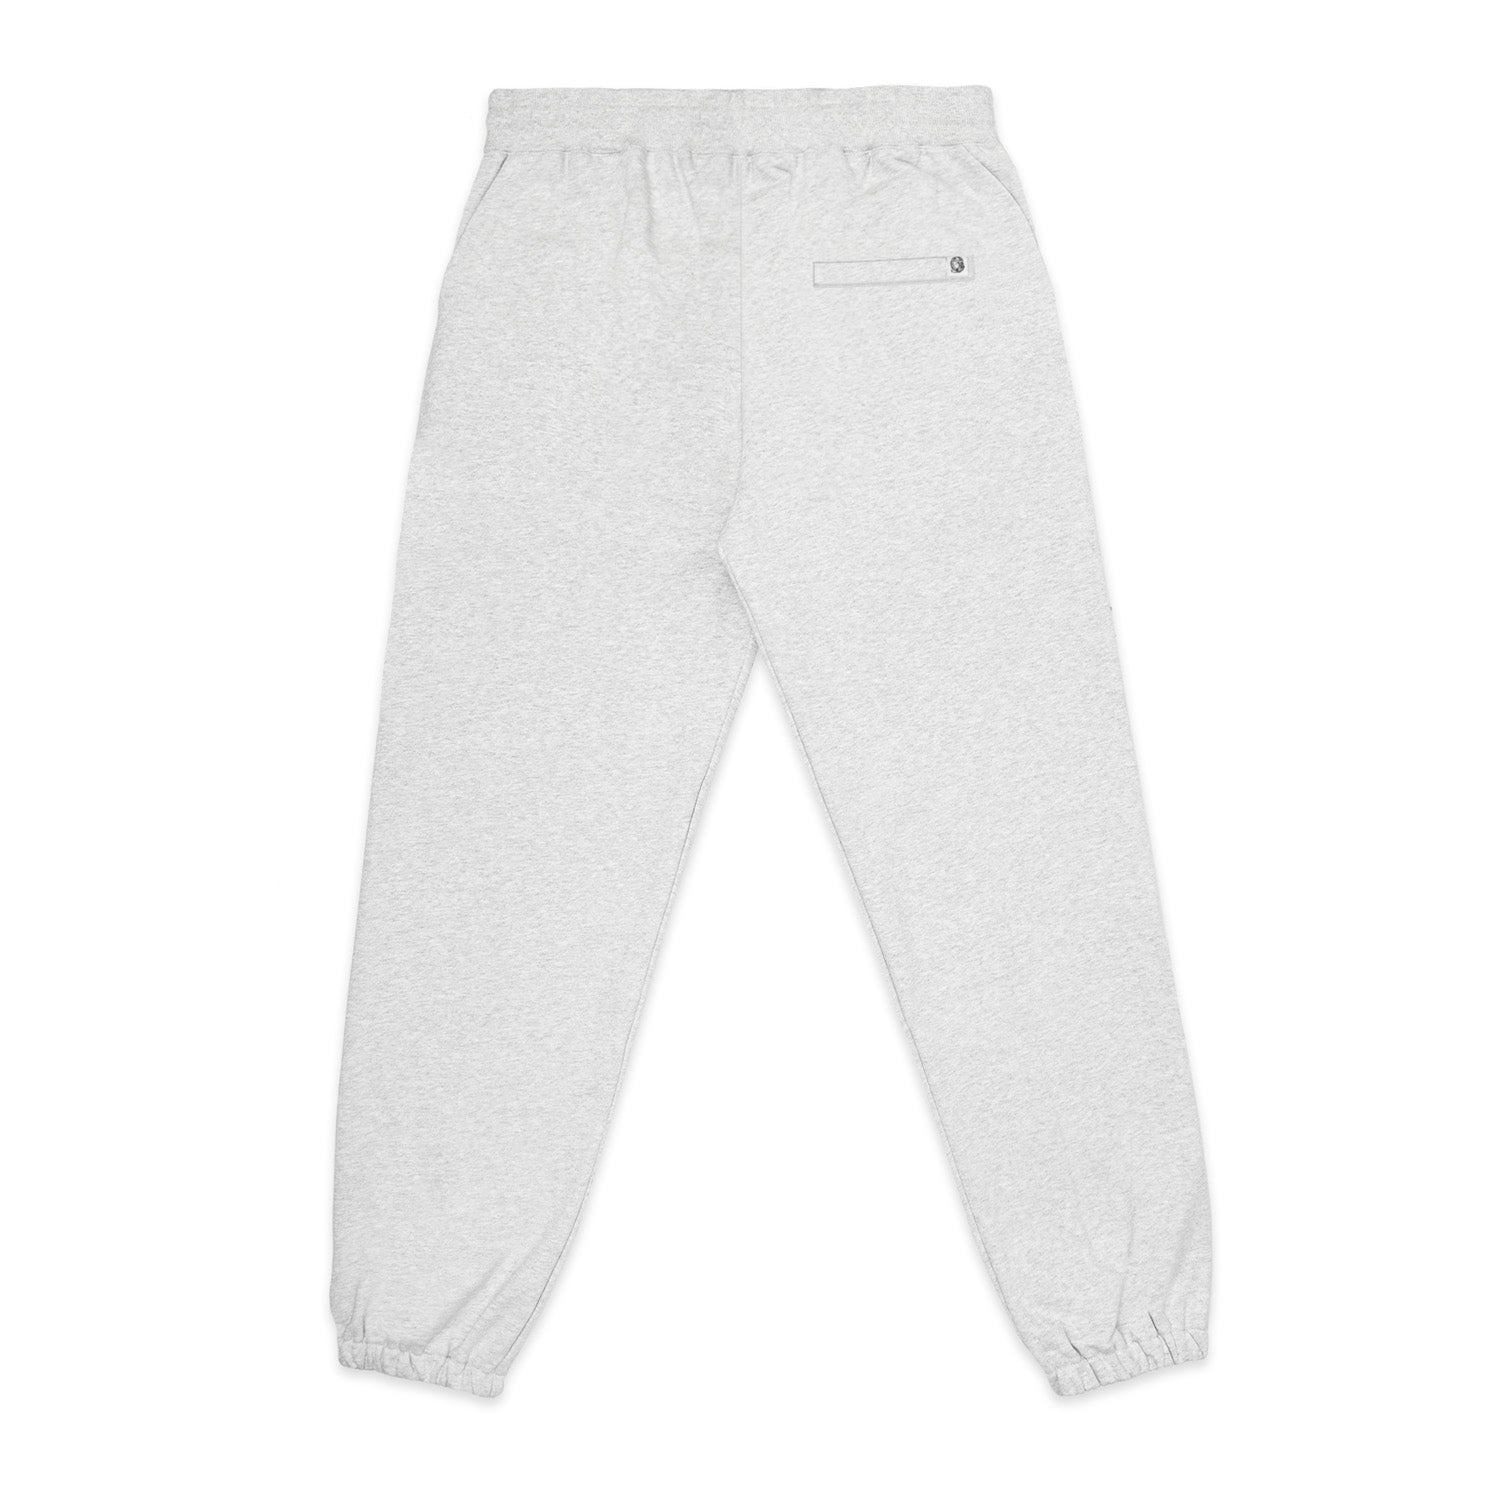 Example product title BB Script Sweatpant Heather Grey - BOTTOMS - Canada